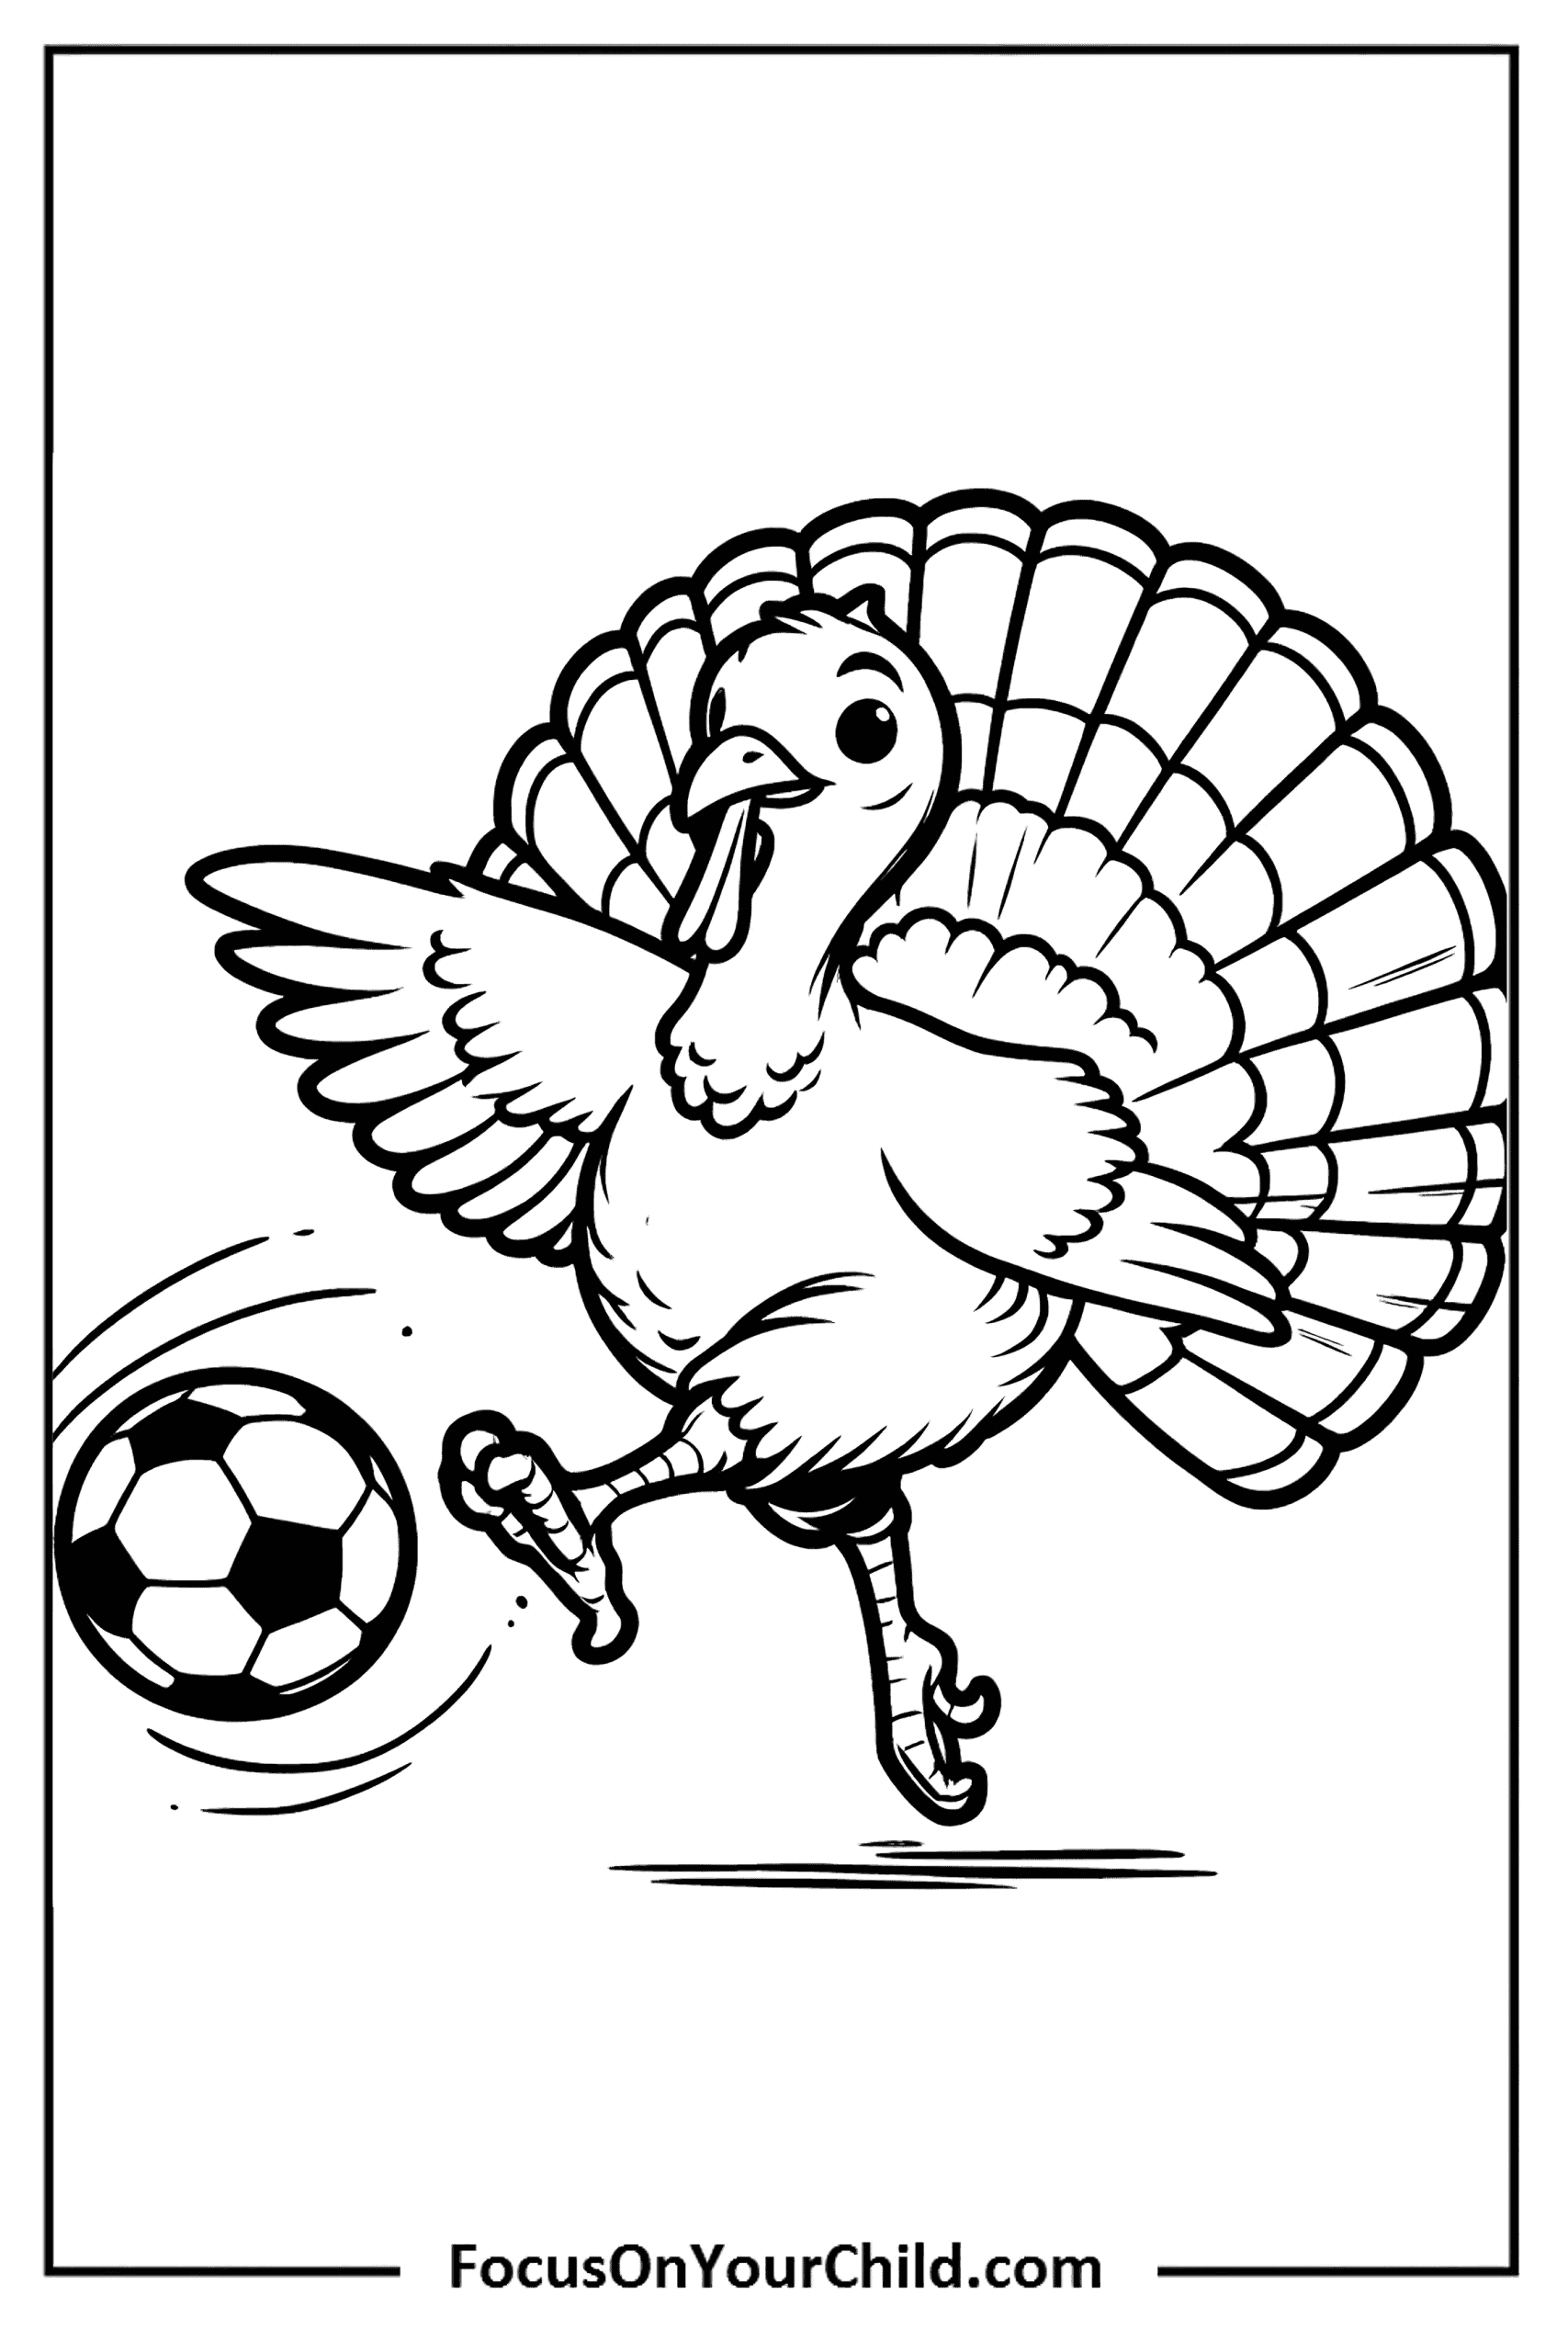 Cheerful turkey playing soccer, perfect for kids coloring.